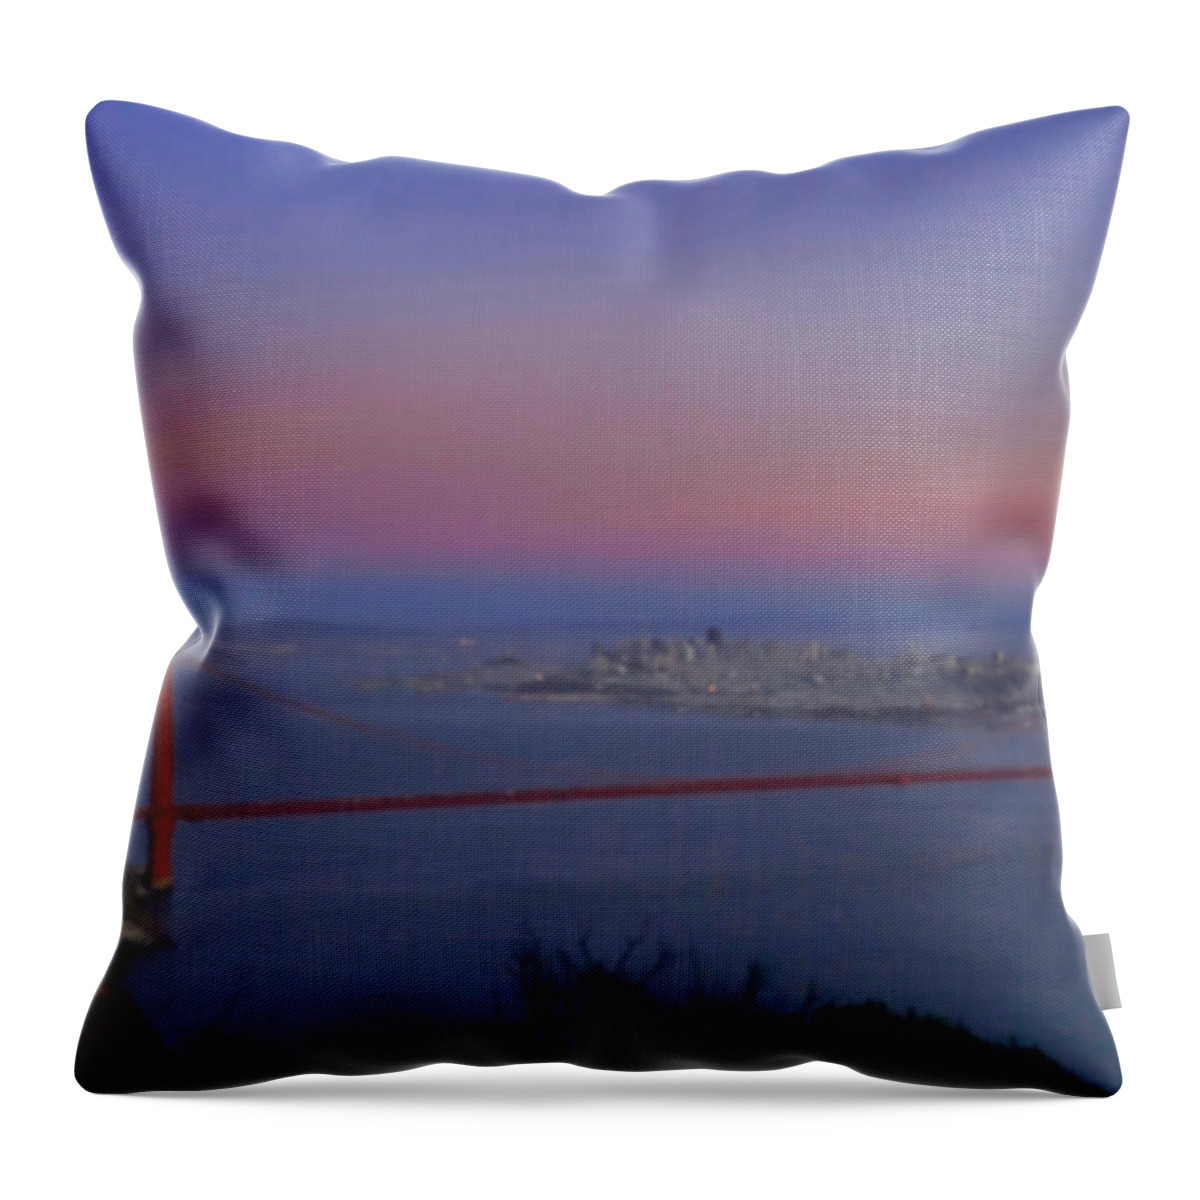 The Buena Vista Throw Pillow featuring the photograph Moon Over The Golden Gate by Tom Singleton